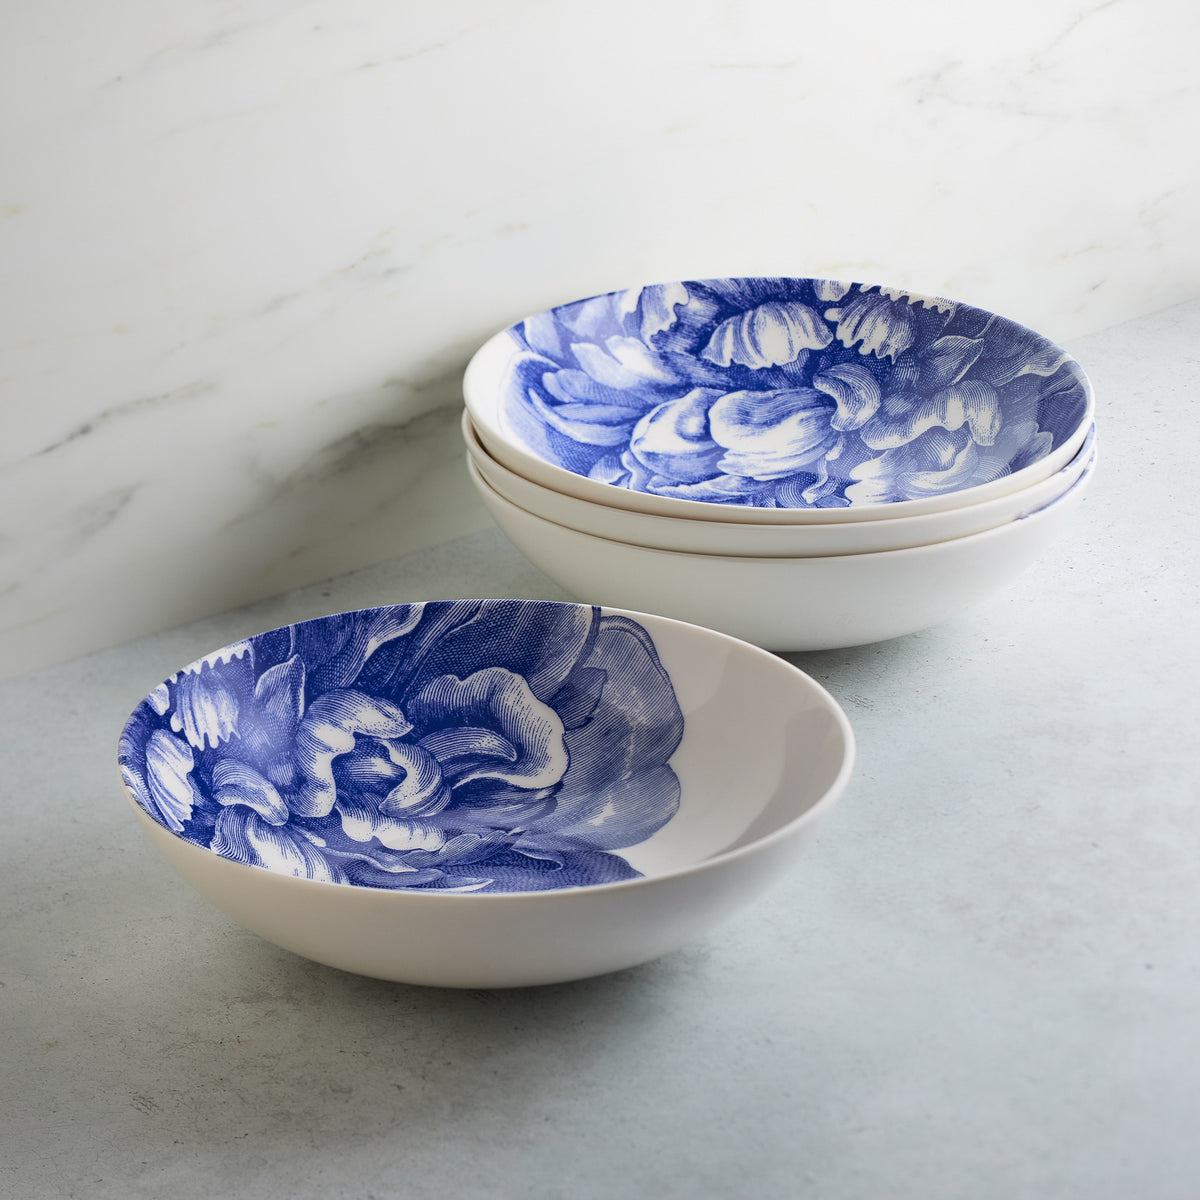 Two white Peony Coupe Soup Bowls from Caskata Artisanal Home, with blue peony designs inside, stacked partially on a marble surface.